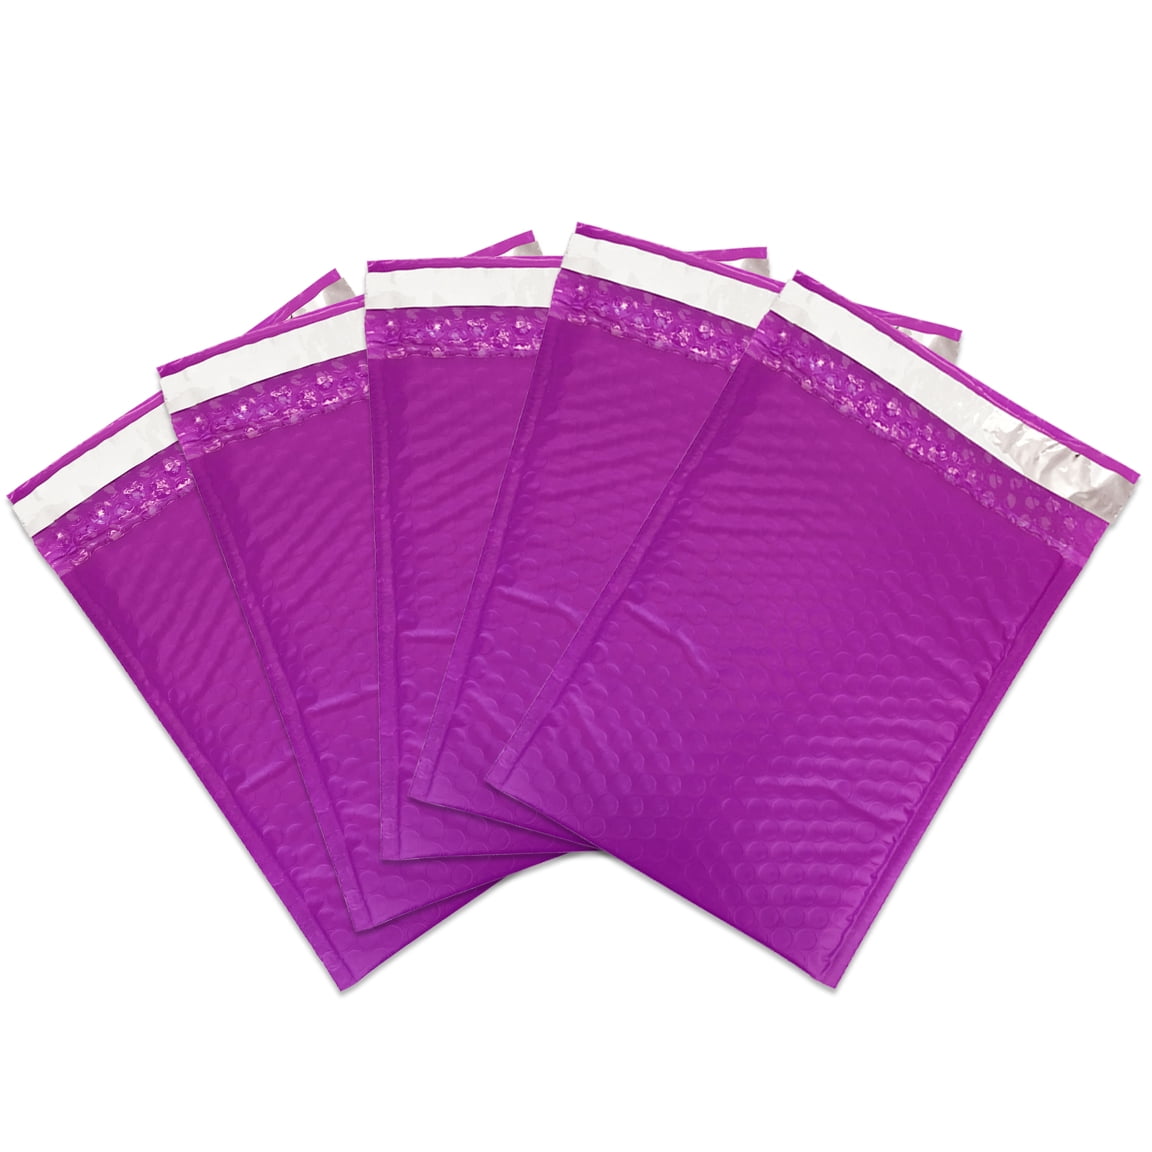 25 Purple 4x8 Poly Bubble Mailers Quality Padded Shipping Mailing Envelopes 